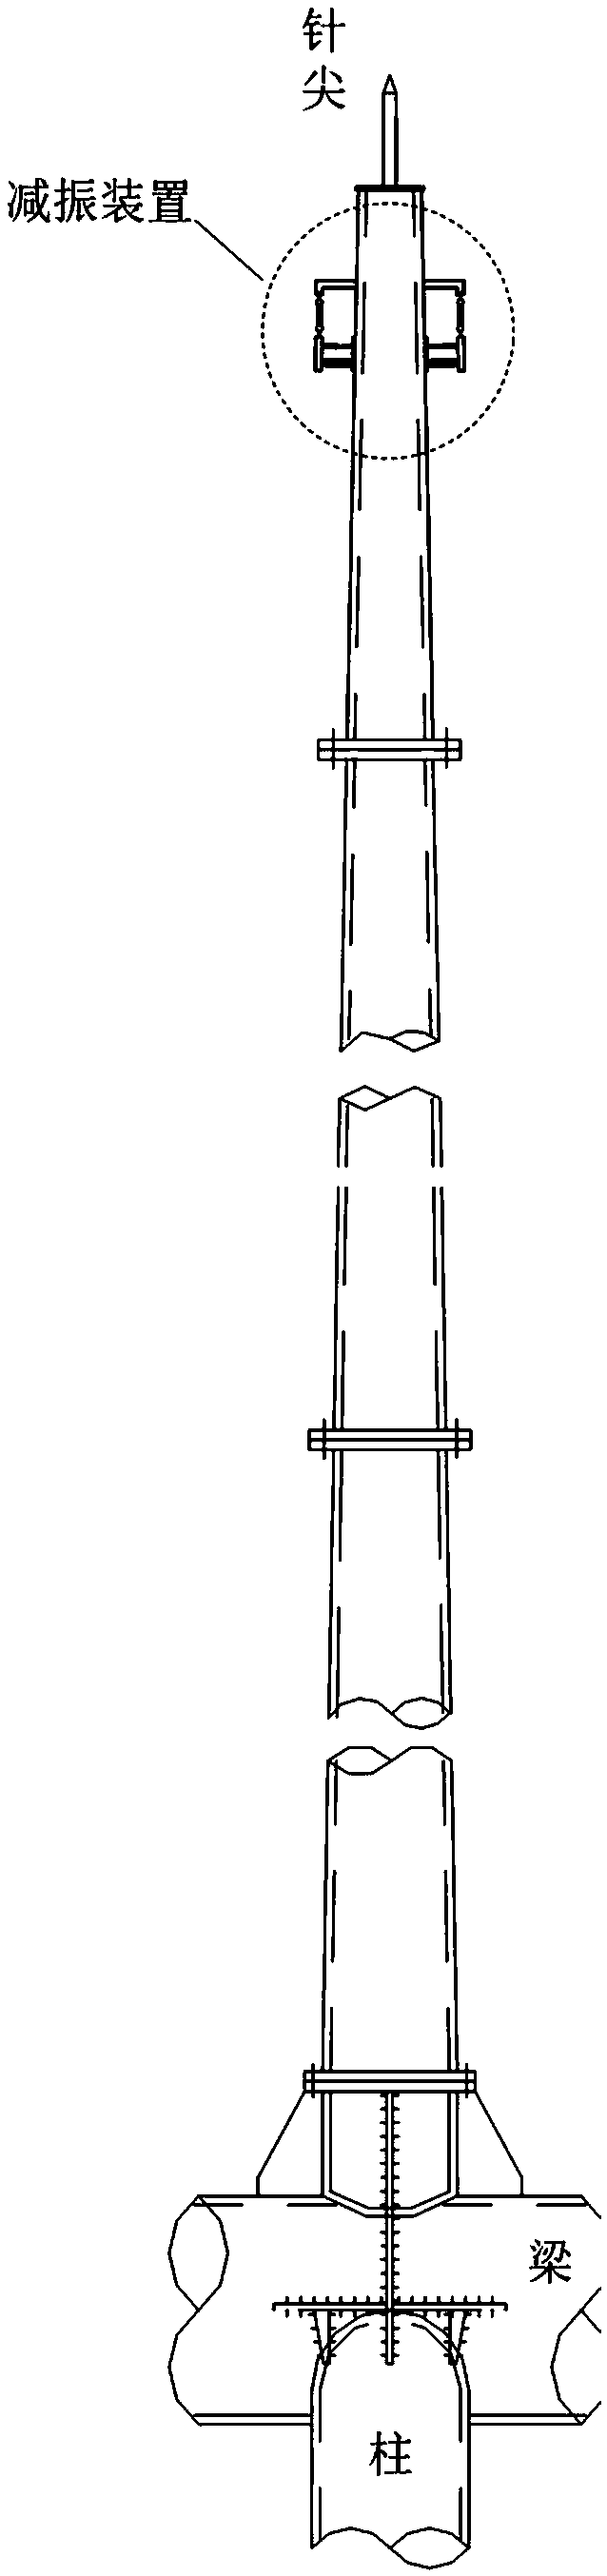 A lightning rod vibration absorbing device for a substation